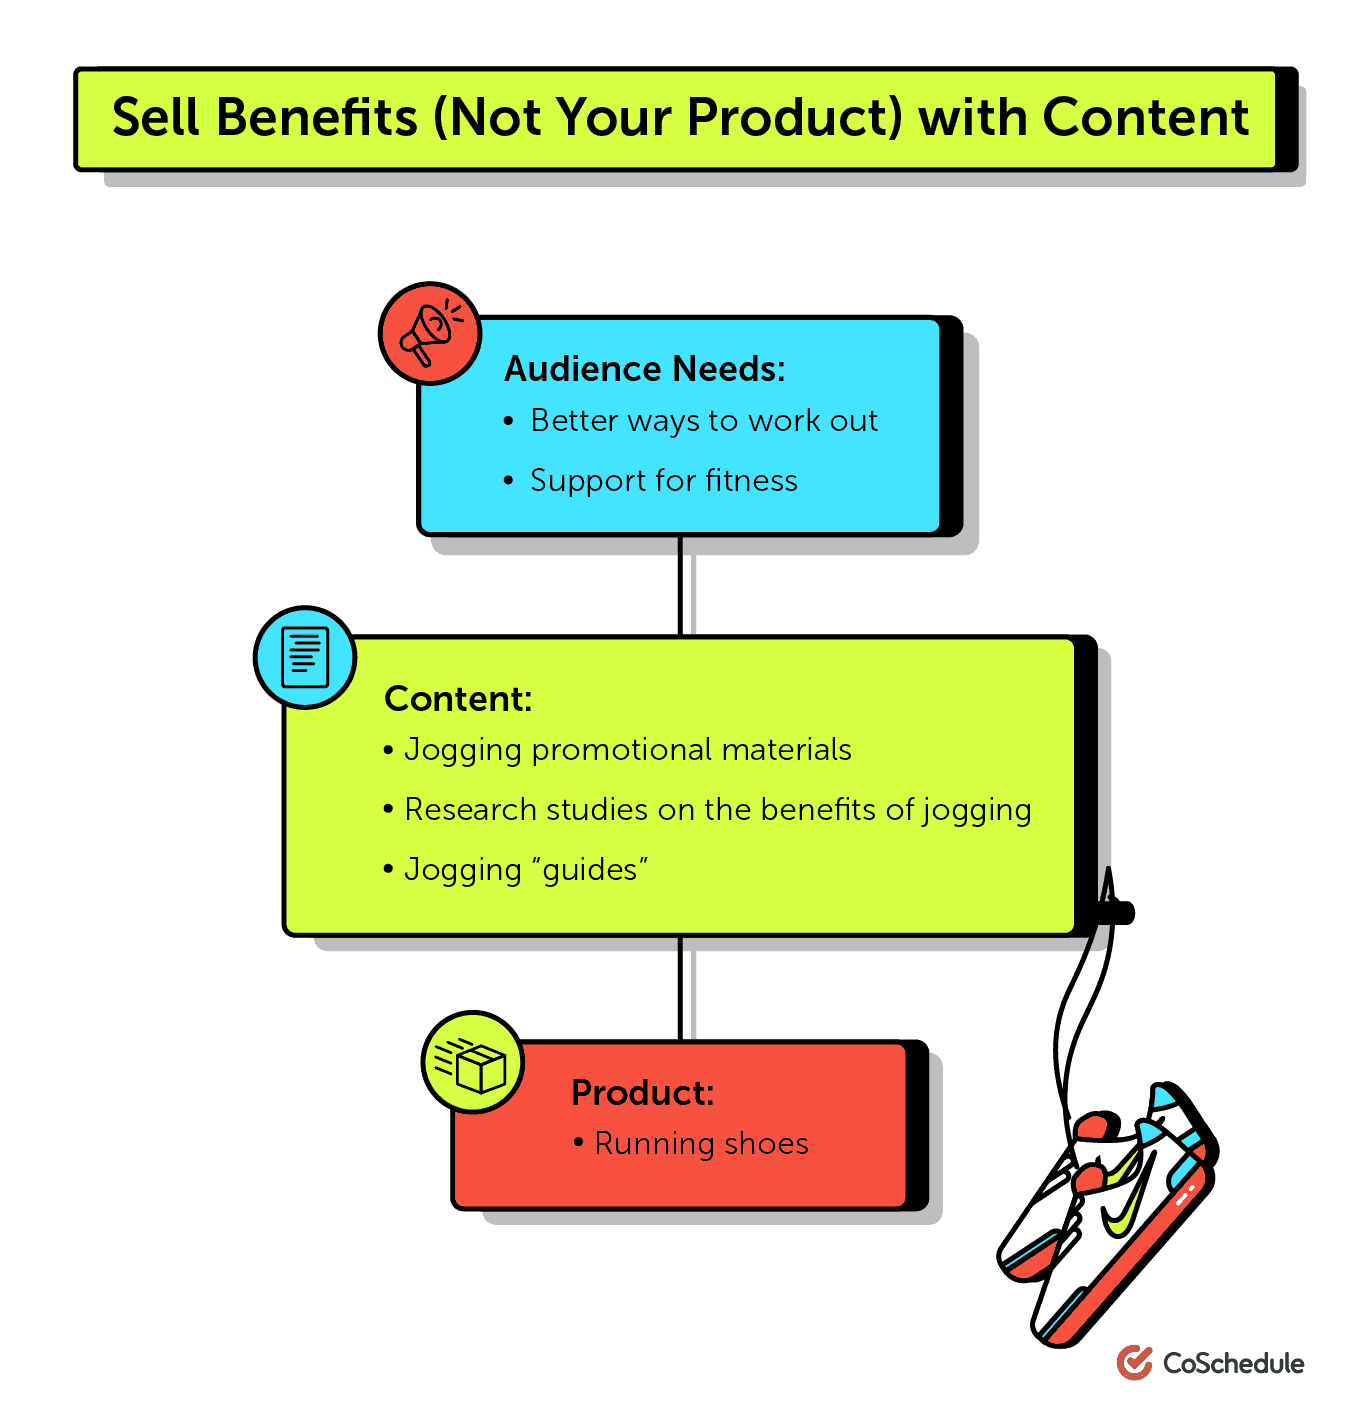 Sell benefits instead of products with content